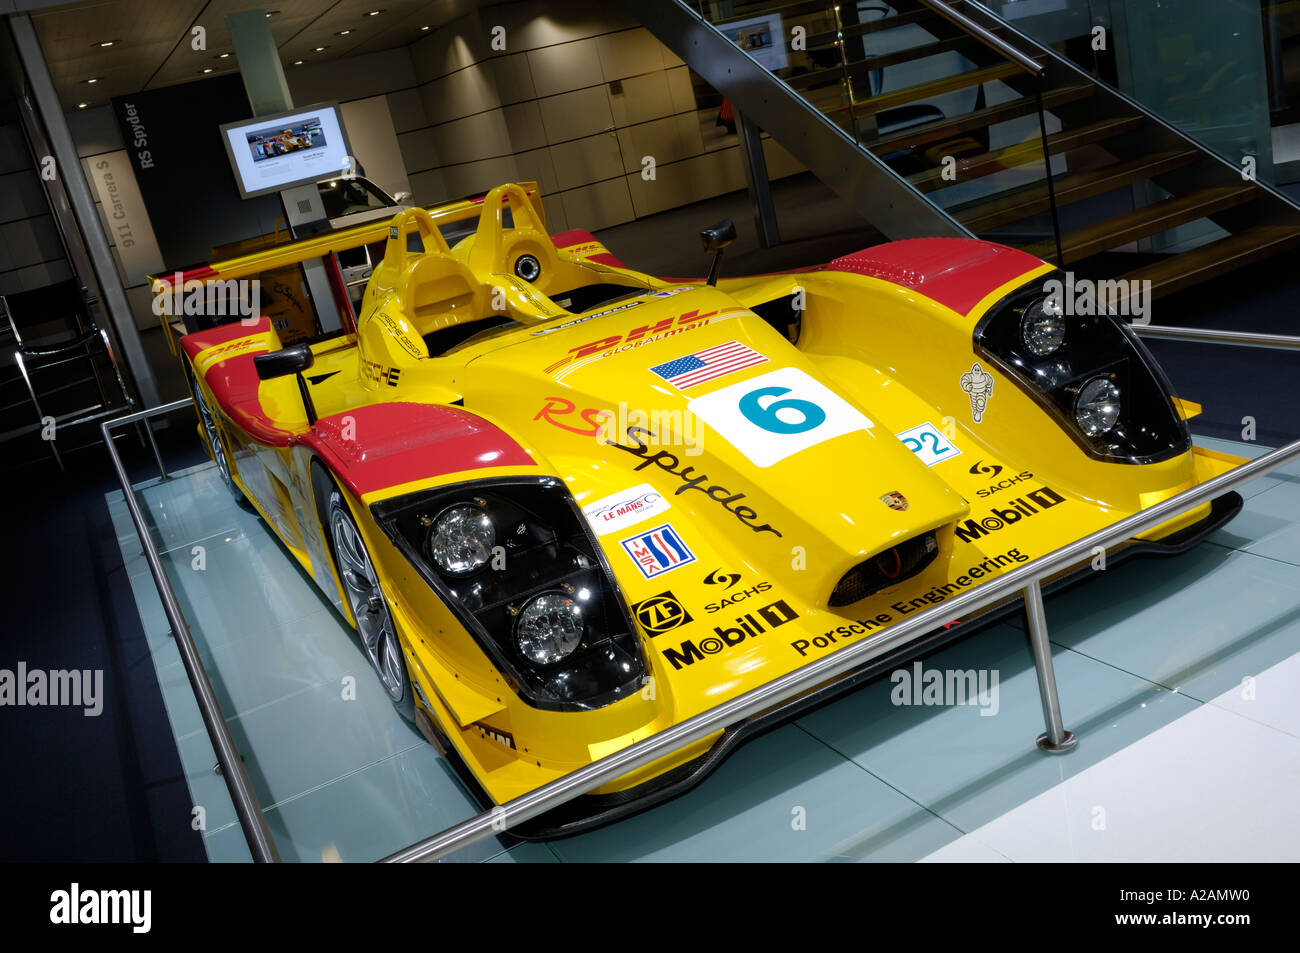 The Porsche RS Spyder LMP2 race car at the 2006 North American International Auto Show in Detroit Michigan Stock Photo